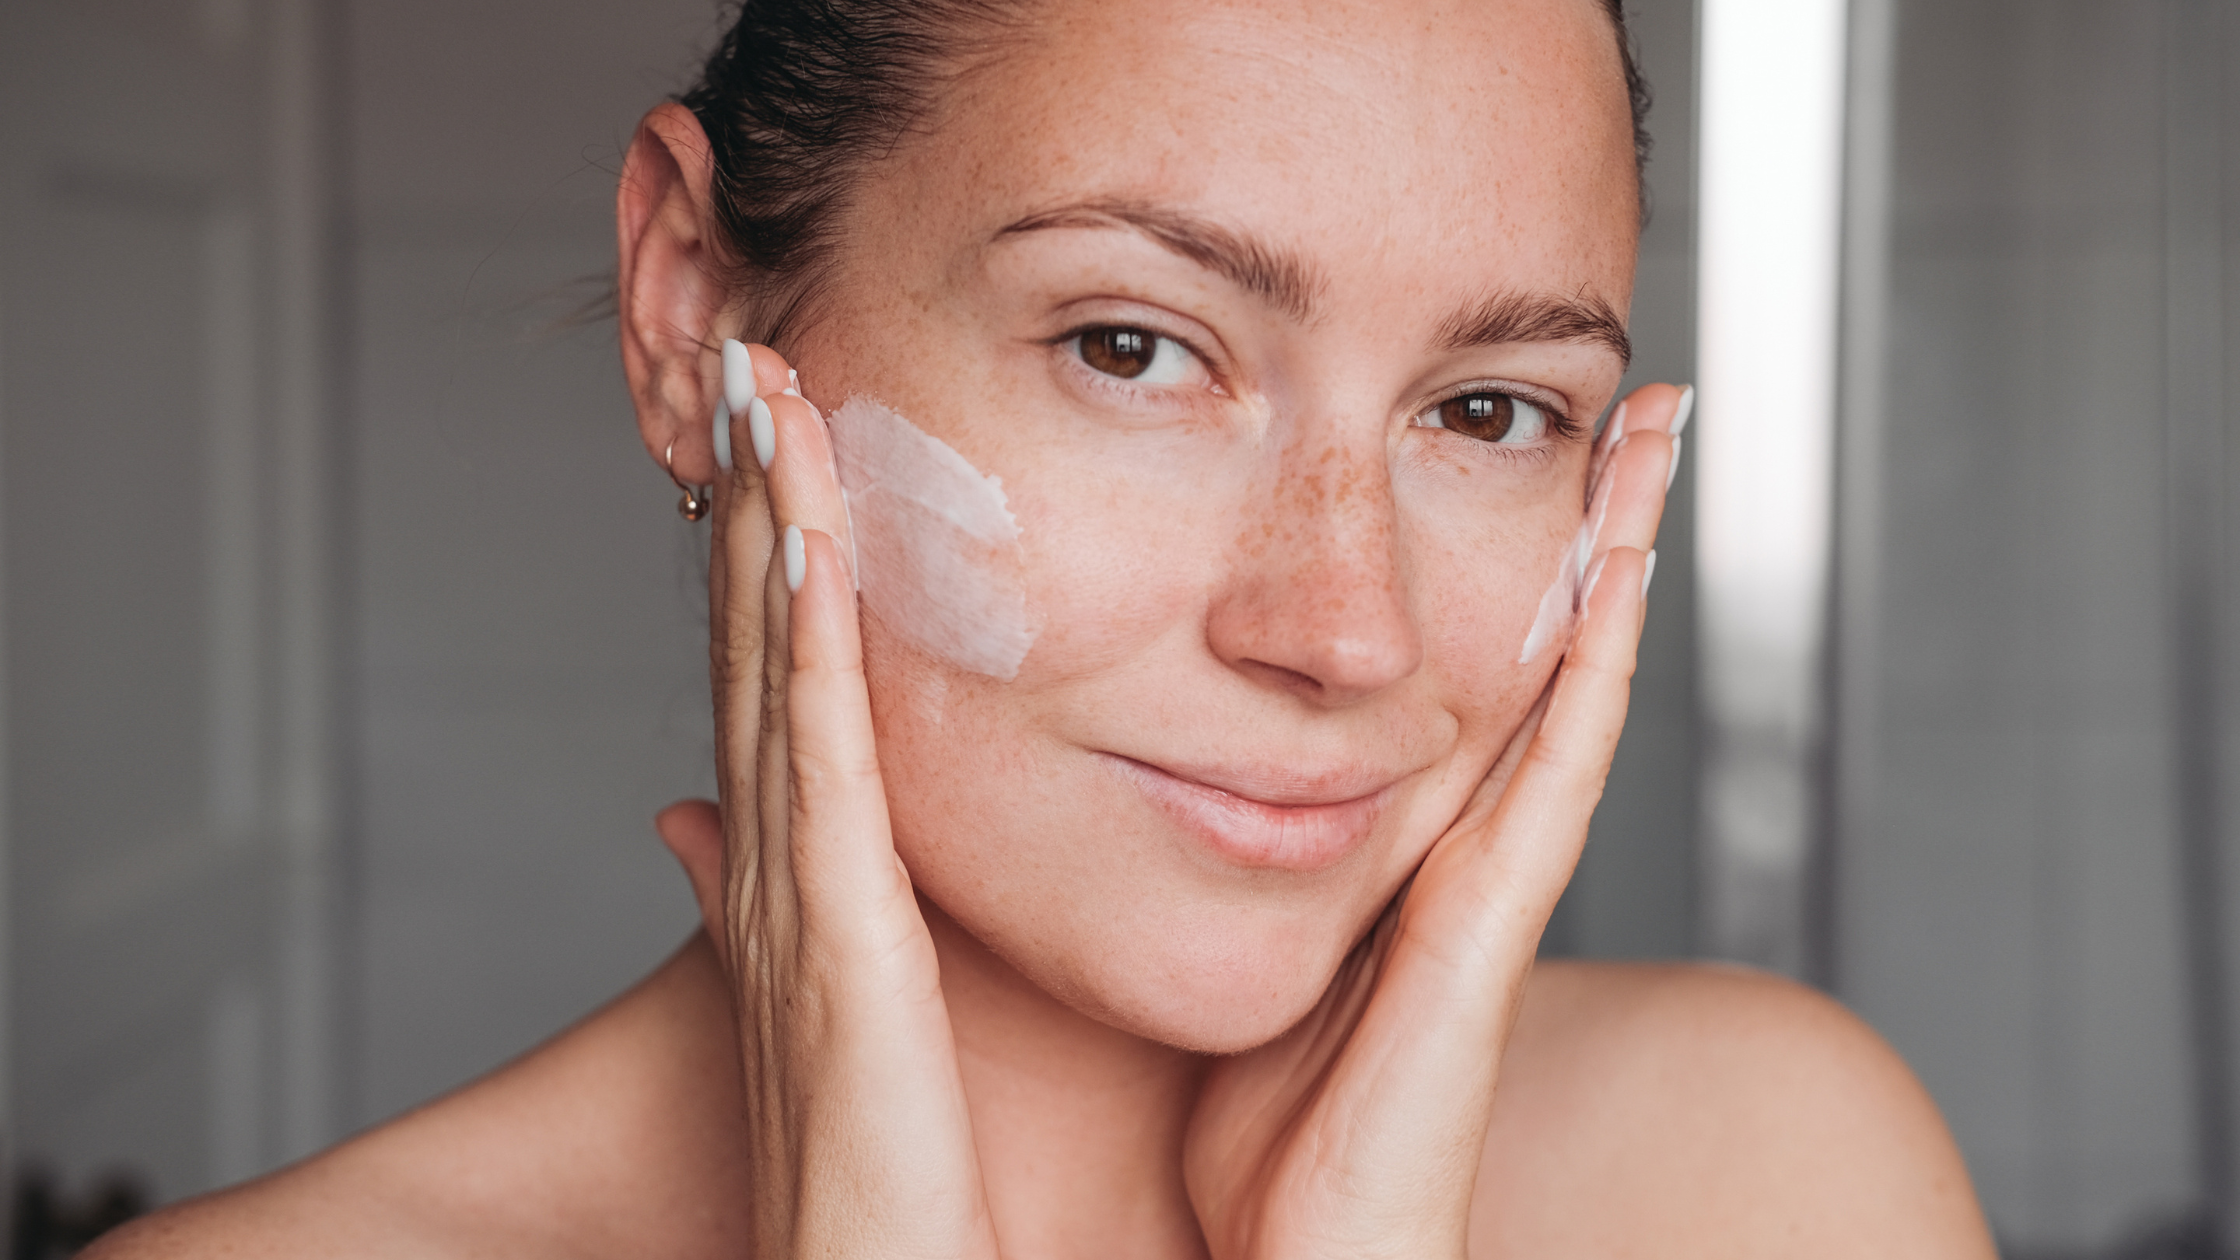 Protect Your Skin: How Sunscreen Helps Fight Aging and Wrinkles